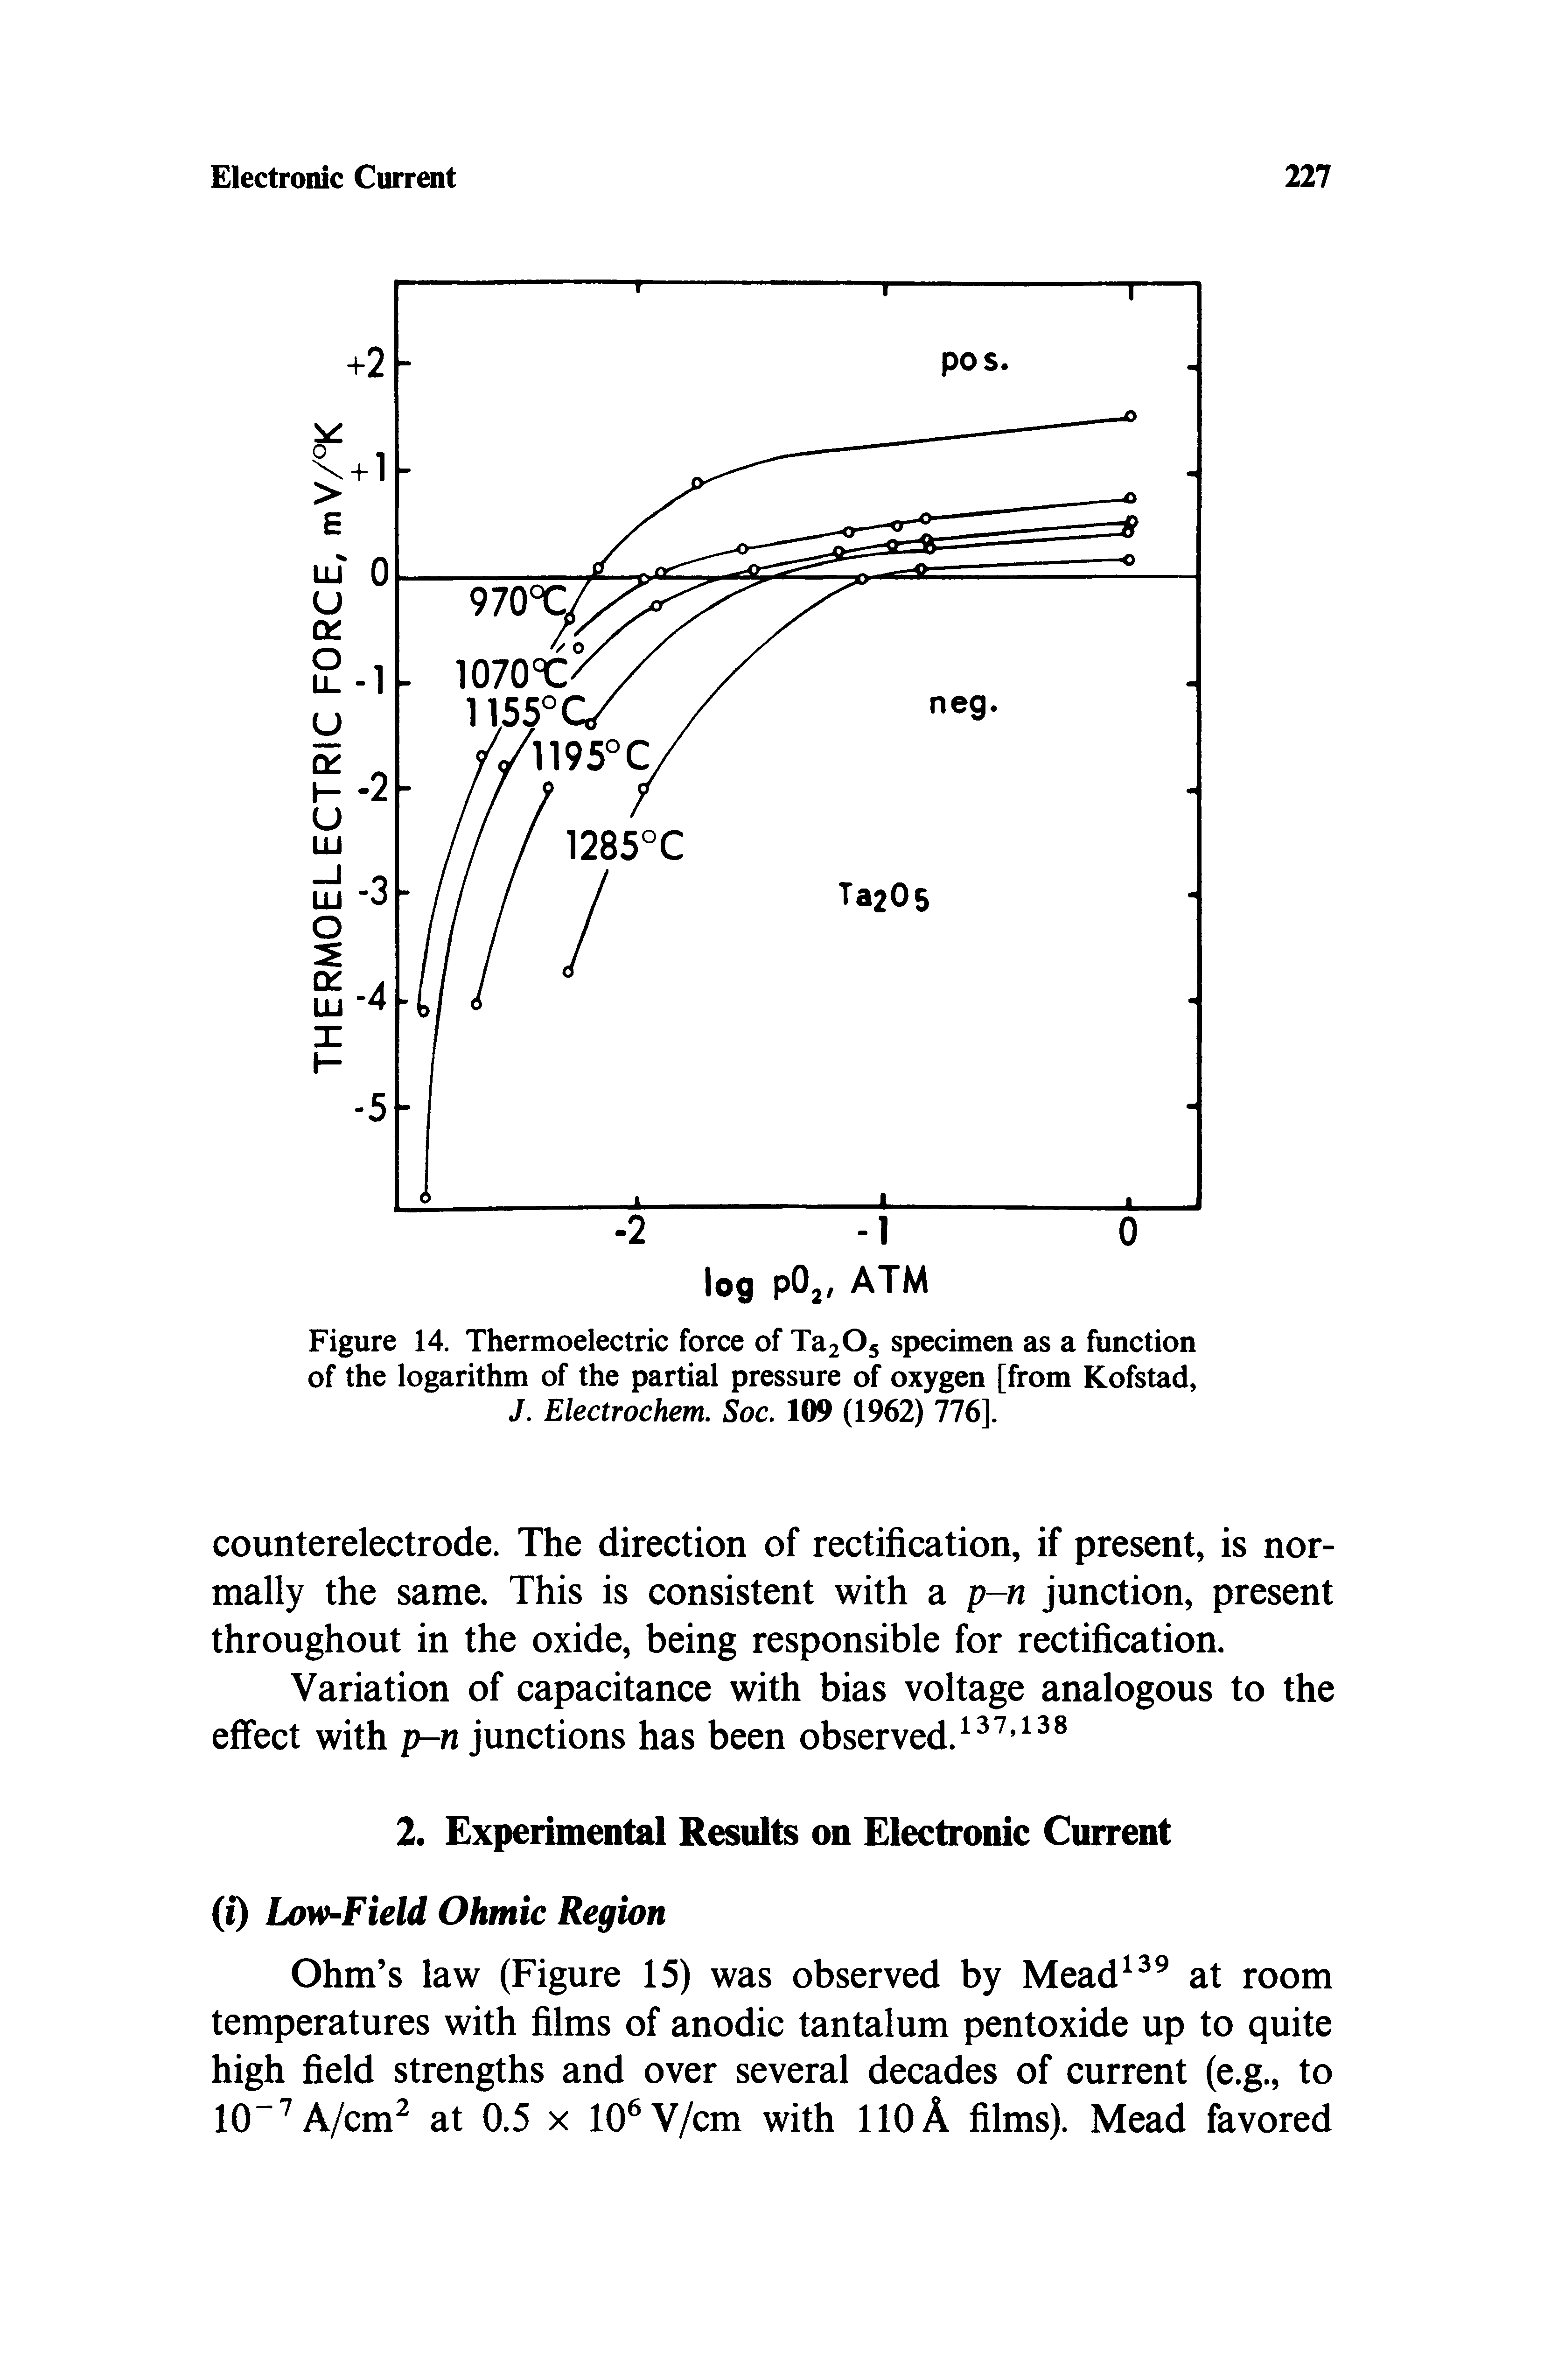 Figure 14. Thermoelectric force of TajOs specimen as a function of the logarithm of the partial pressure of oxygen [from Kofstad, J. Electrochem. Soc. 109 (1962) 776].